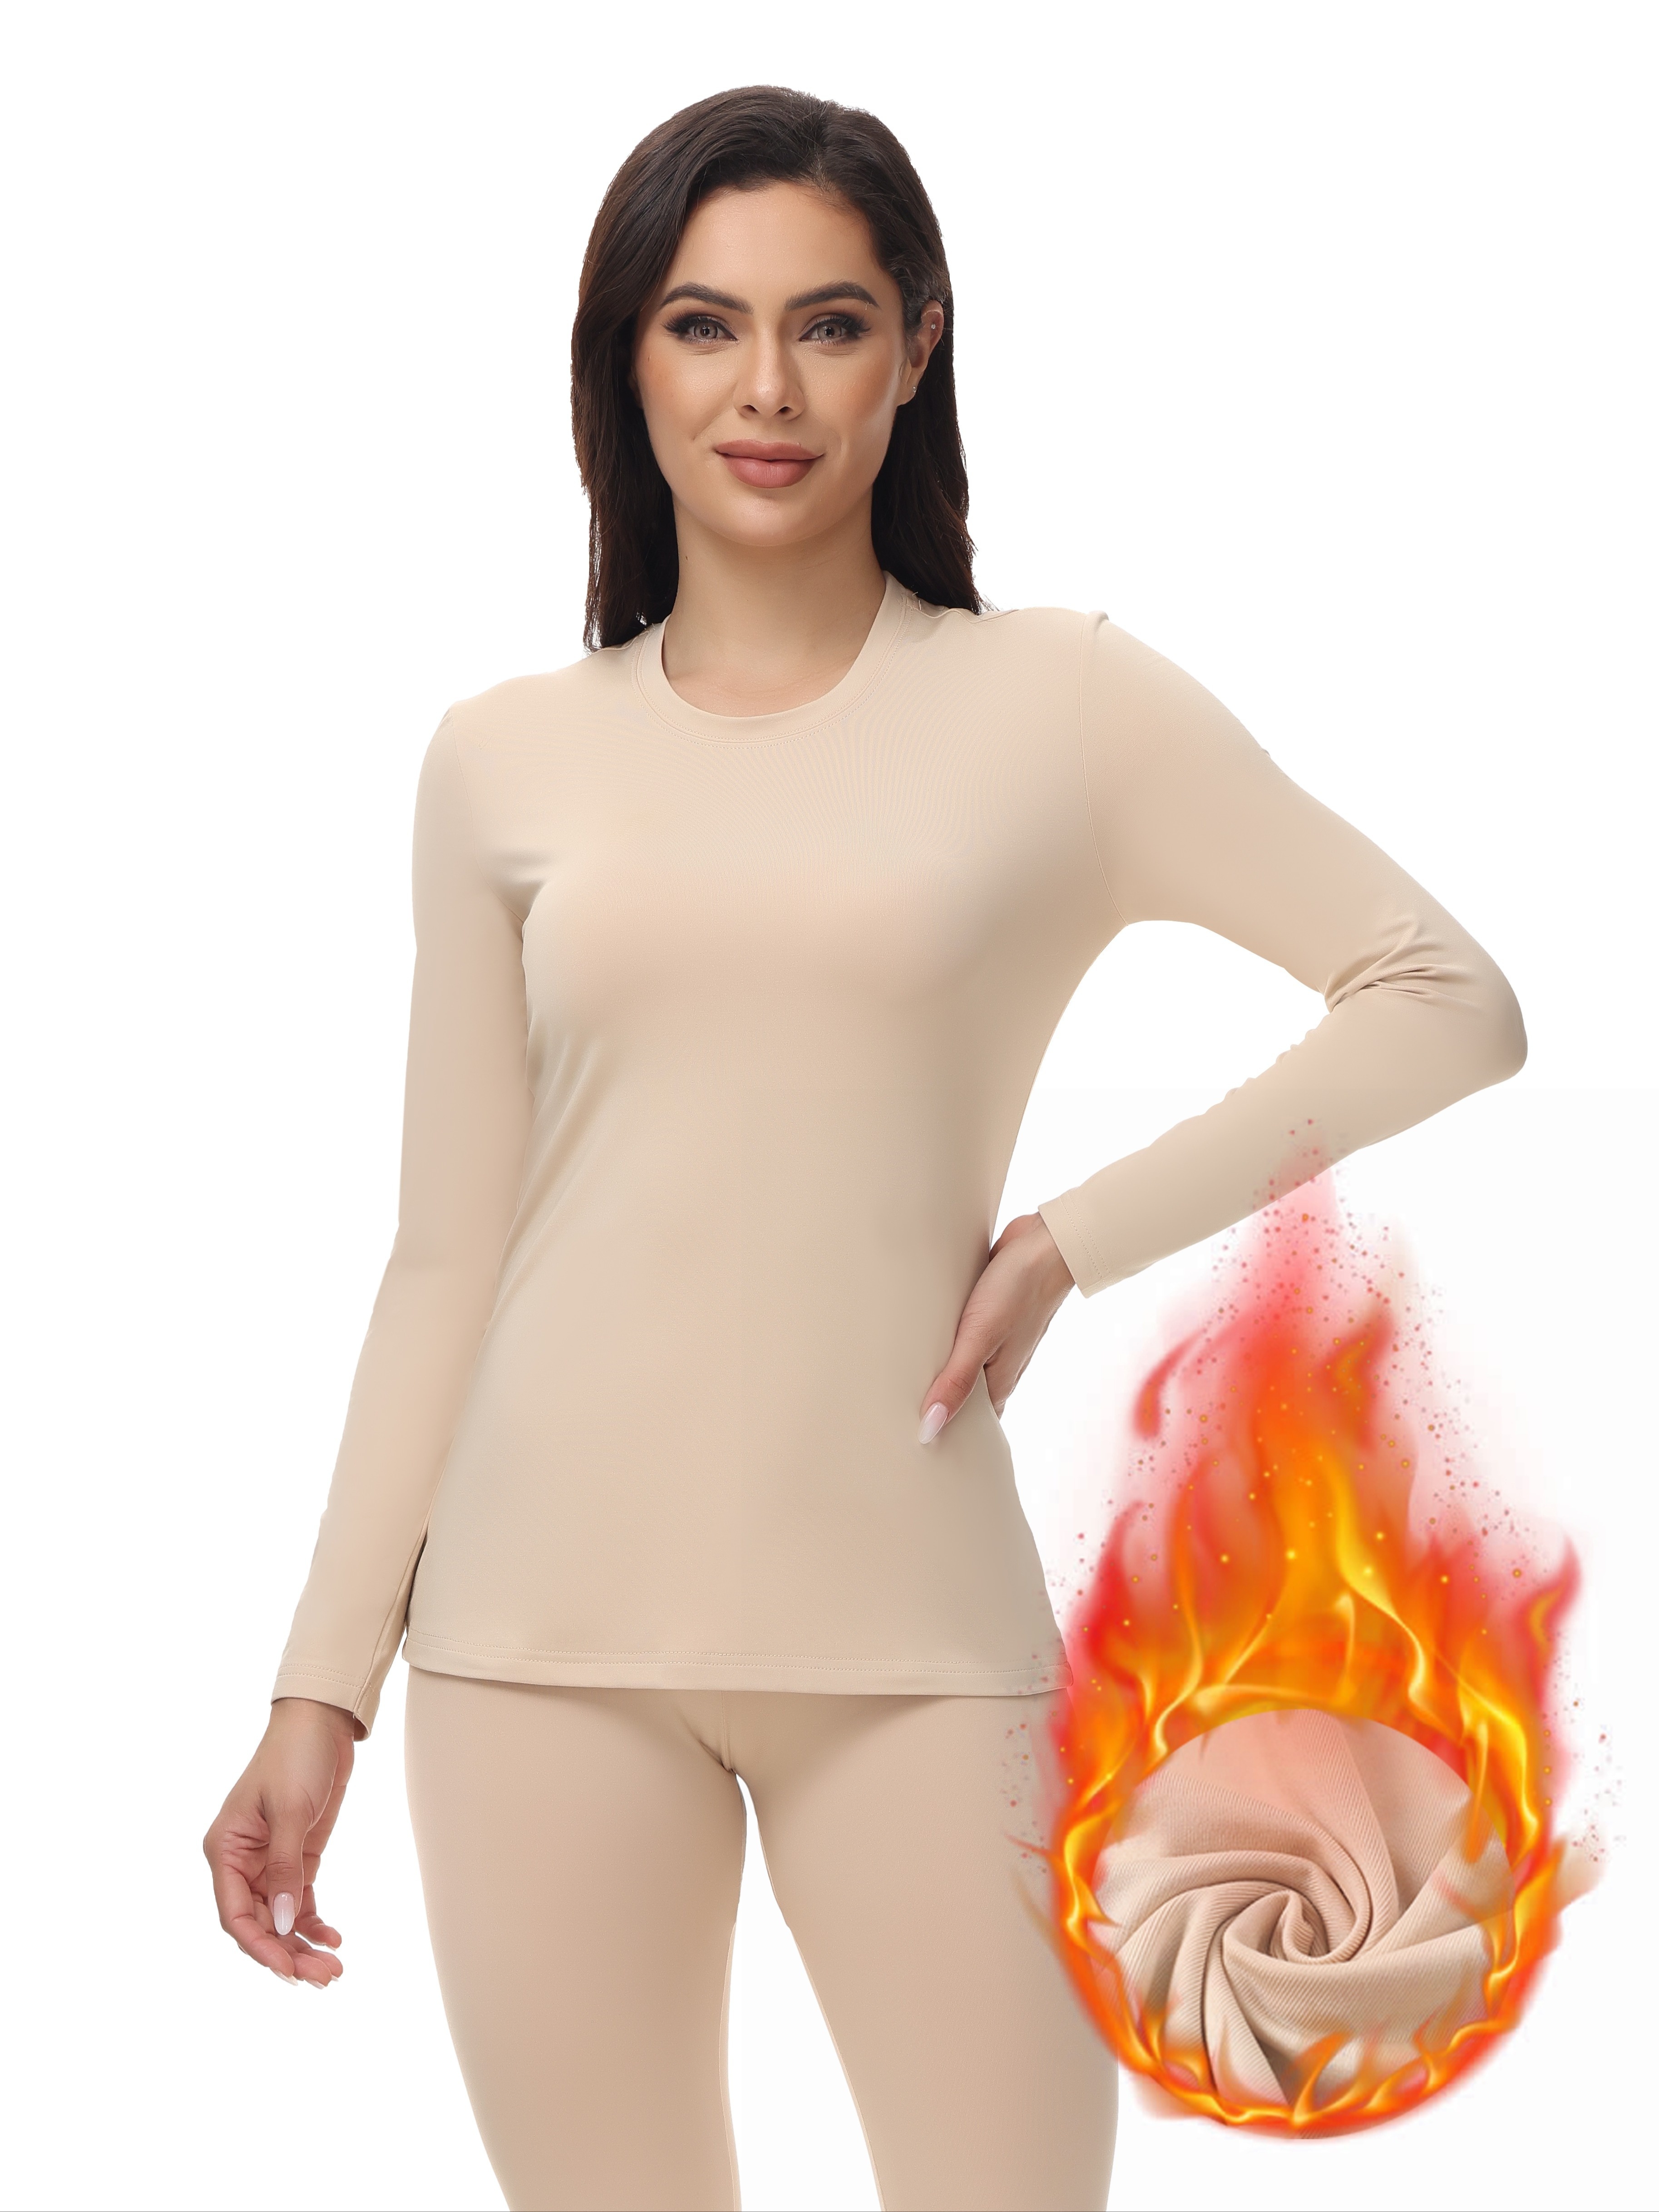 TYTSP Thermal Underwear for Women, Seamless Thermal India